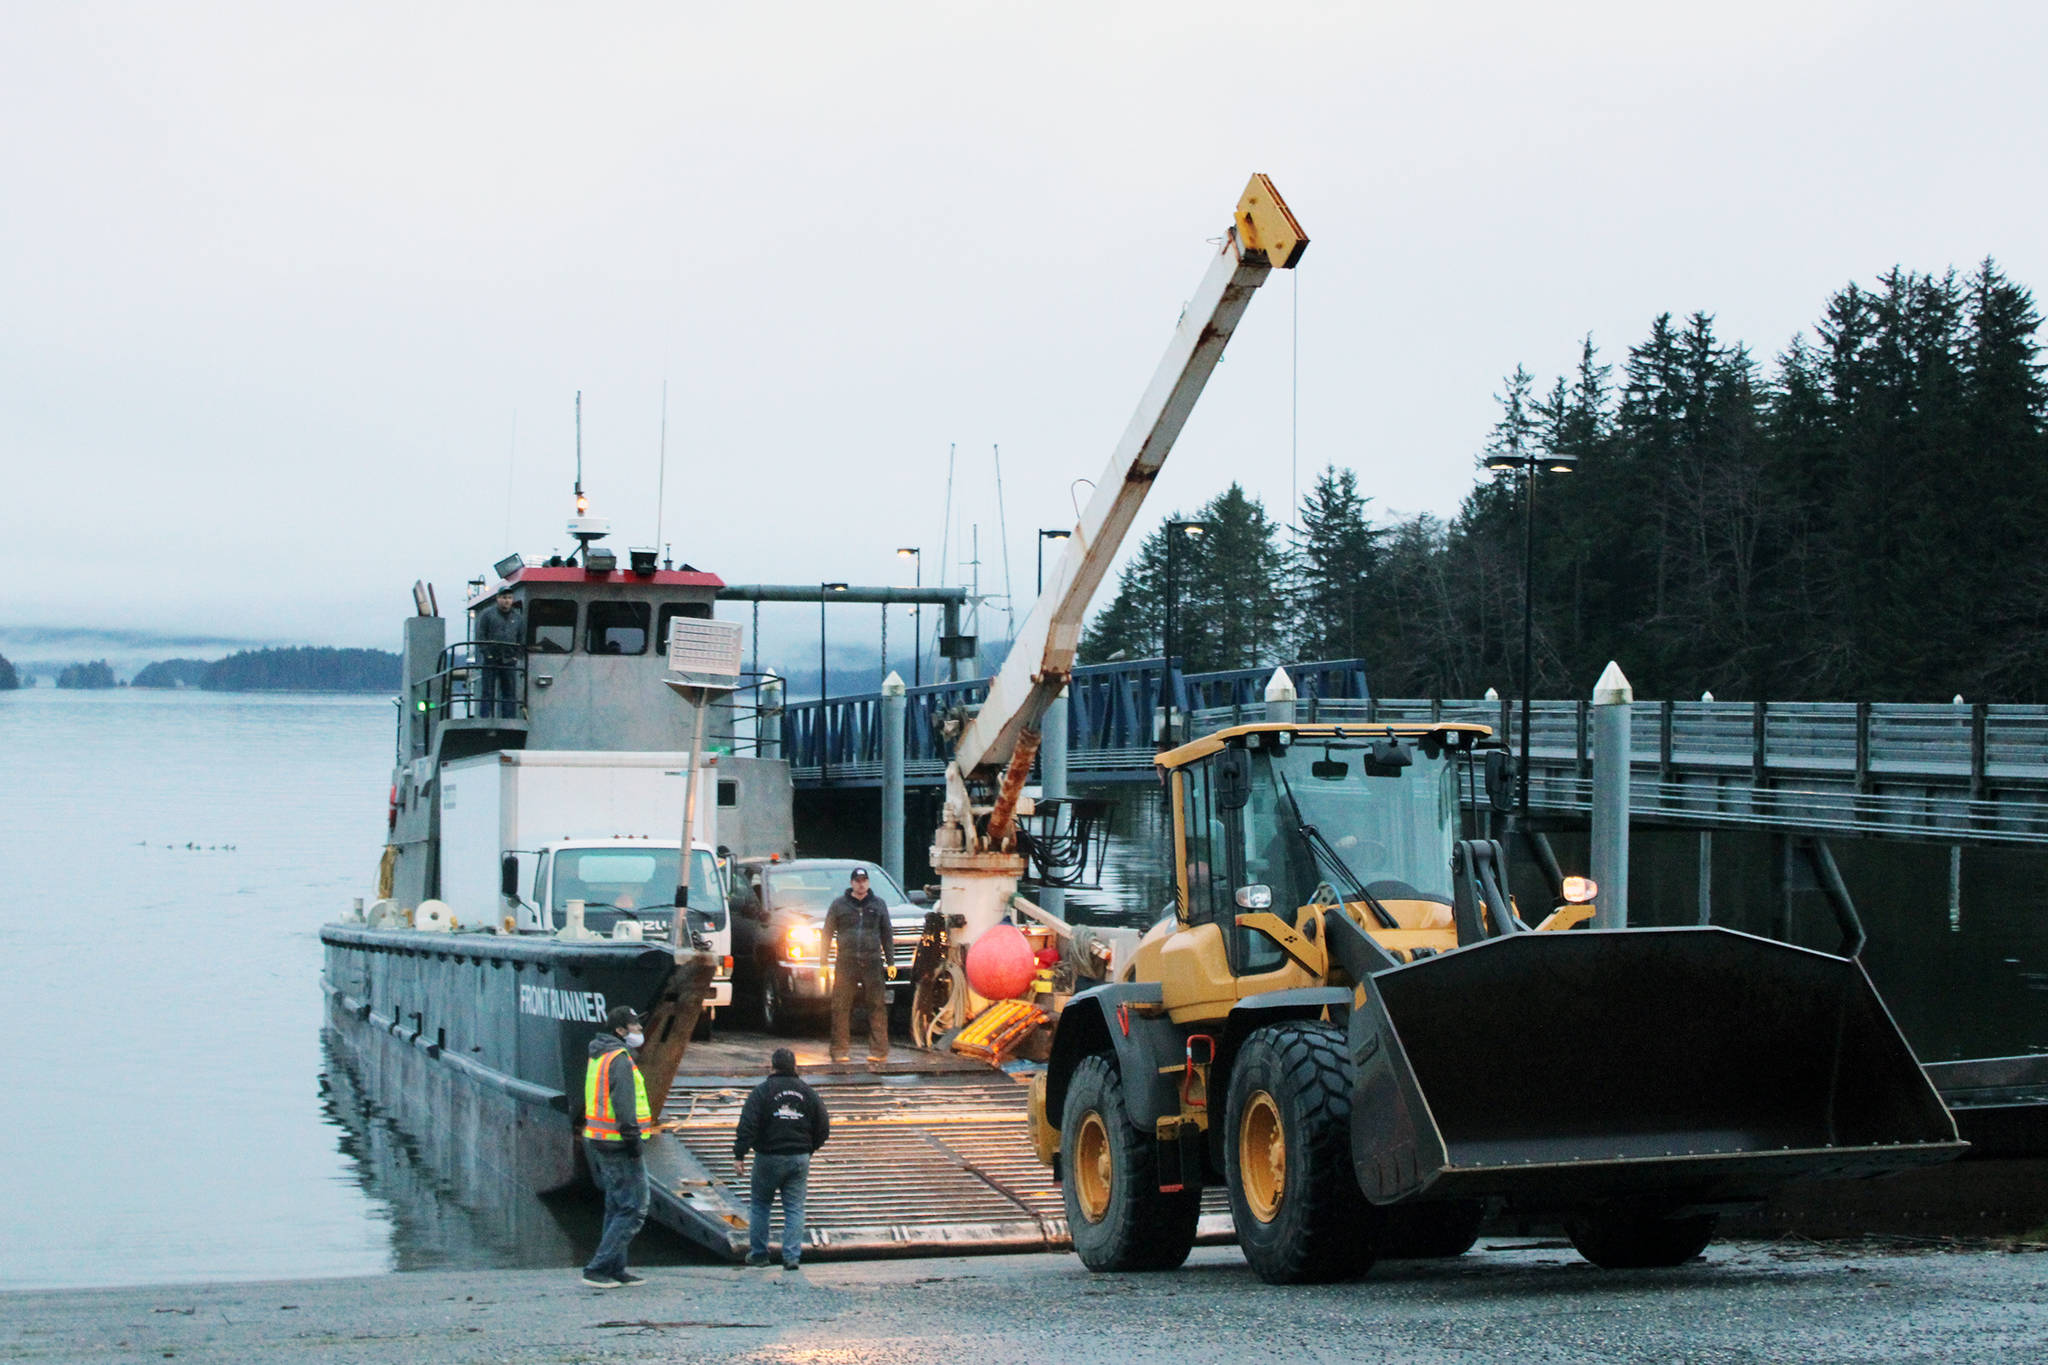 Personnel from the Central Council Tlingit and Haida Indian Tribes of Alaska load a front-end loader aboard the vessel Frontrunner for transit to Haines to provide relief and assistance in recovery efforts in Haines following catastrophic rainfall-fueled landslides, Dec. 3, 2020. (Ben Hohenstatt / Juneau Empire)